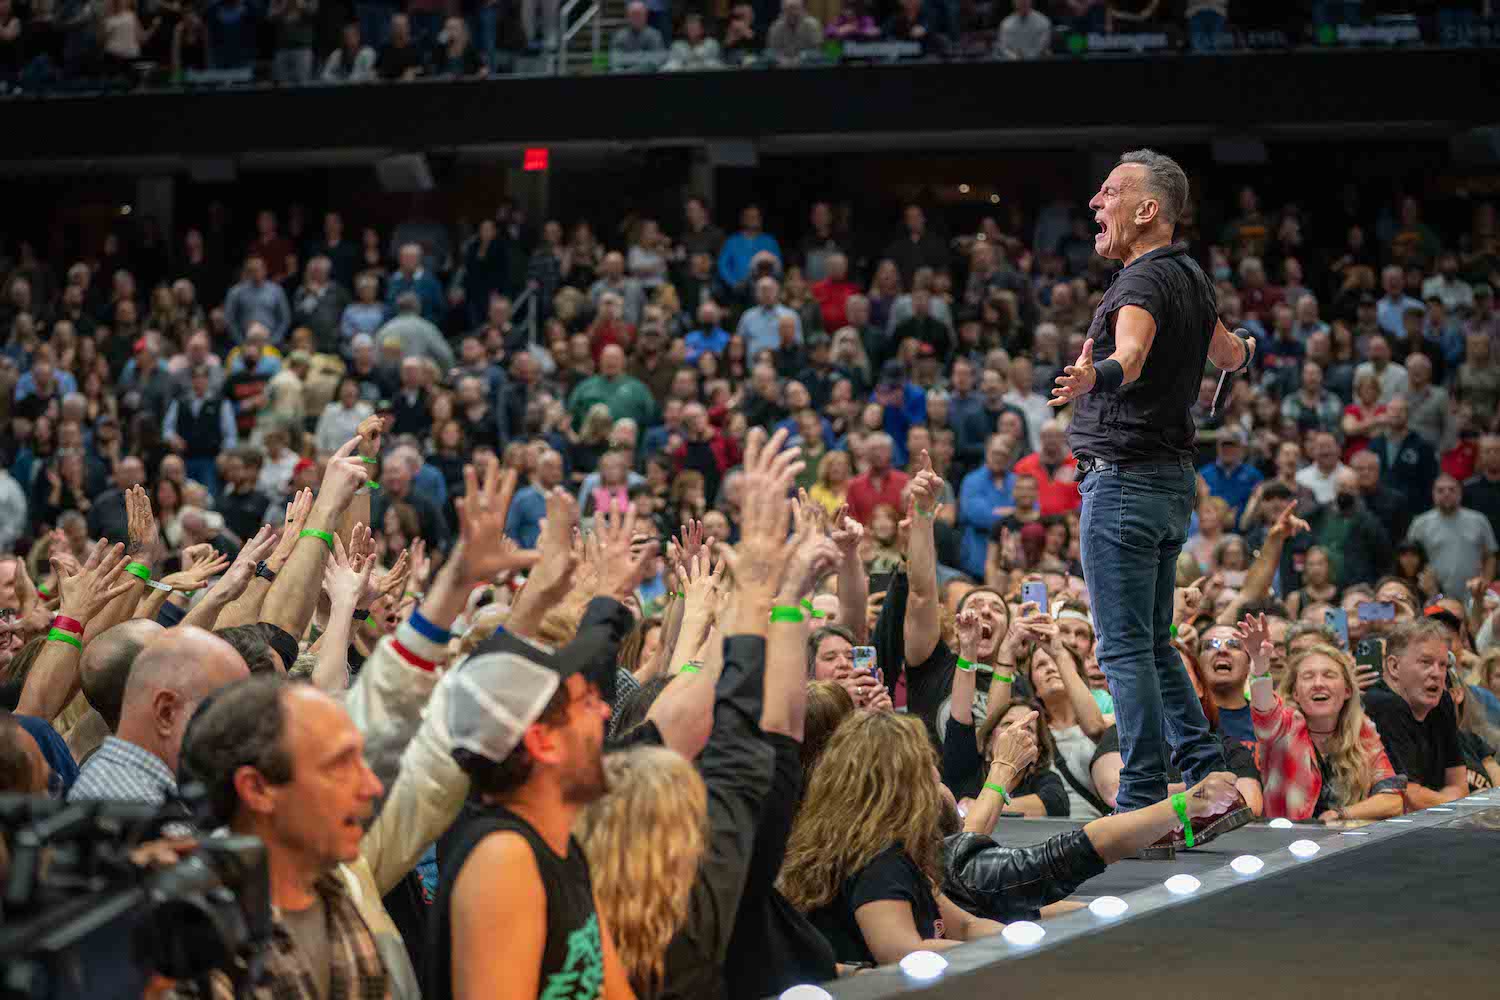 Bruce Springsteen & E Street Band at Rocket Mortgage Fieldhouse, Cleveland, OH on April 5, 2023.